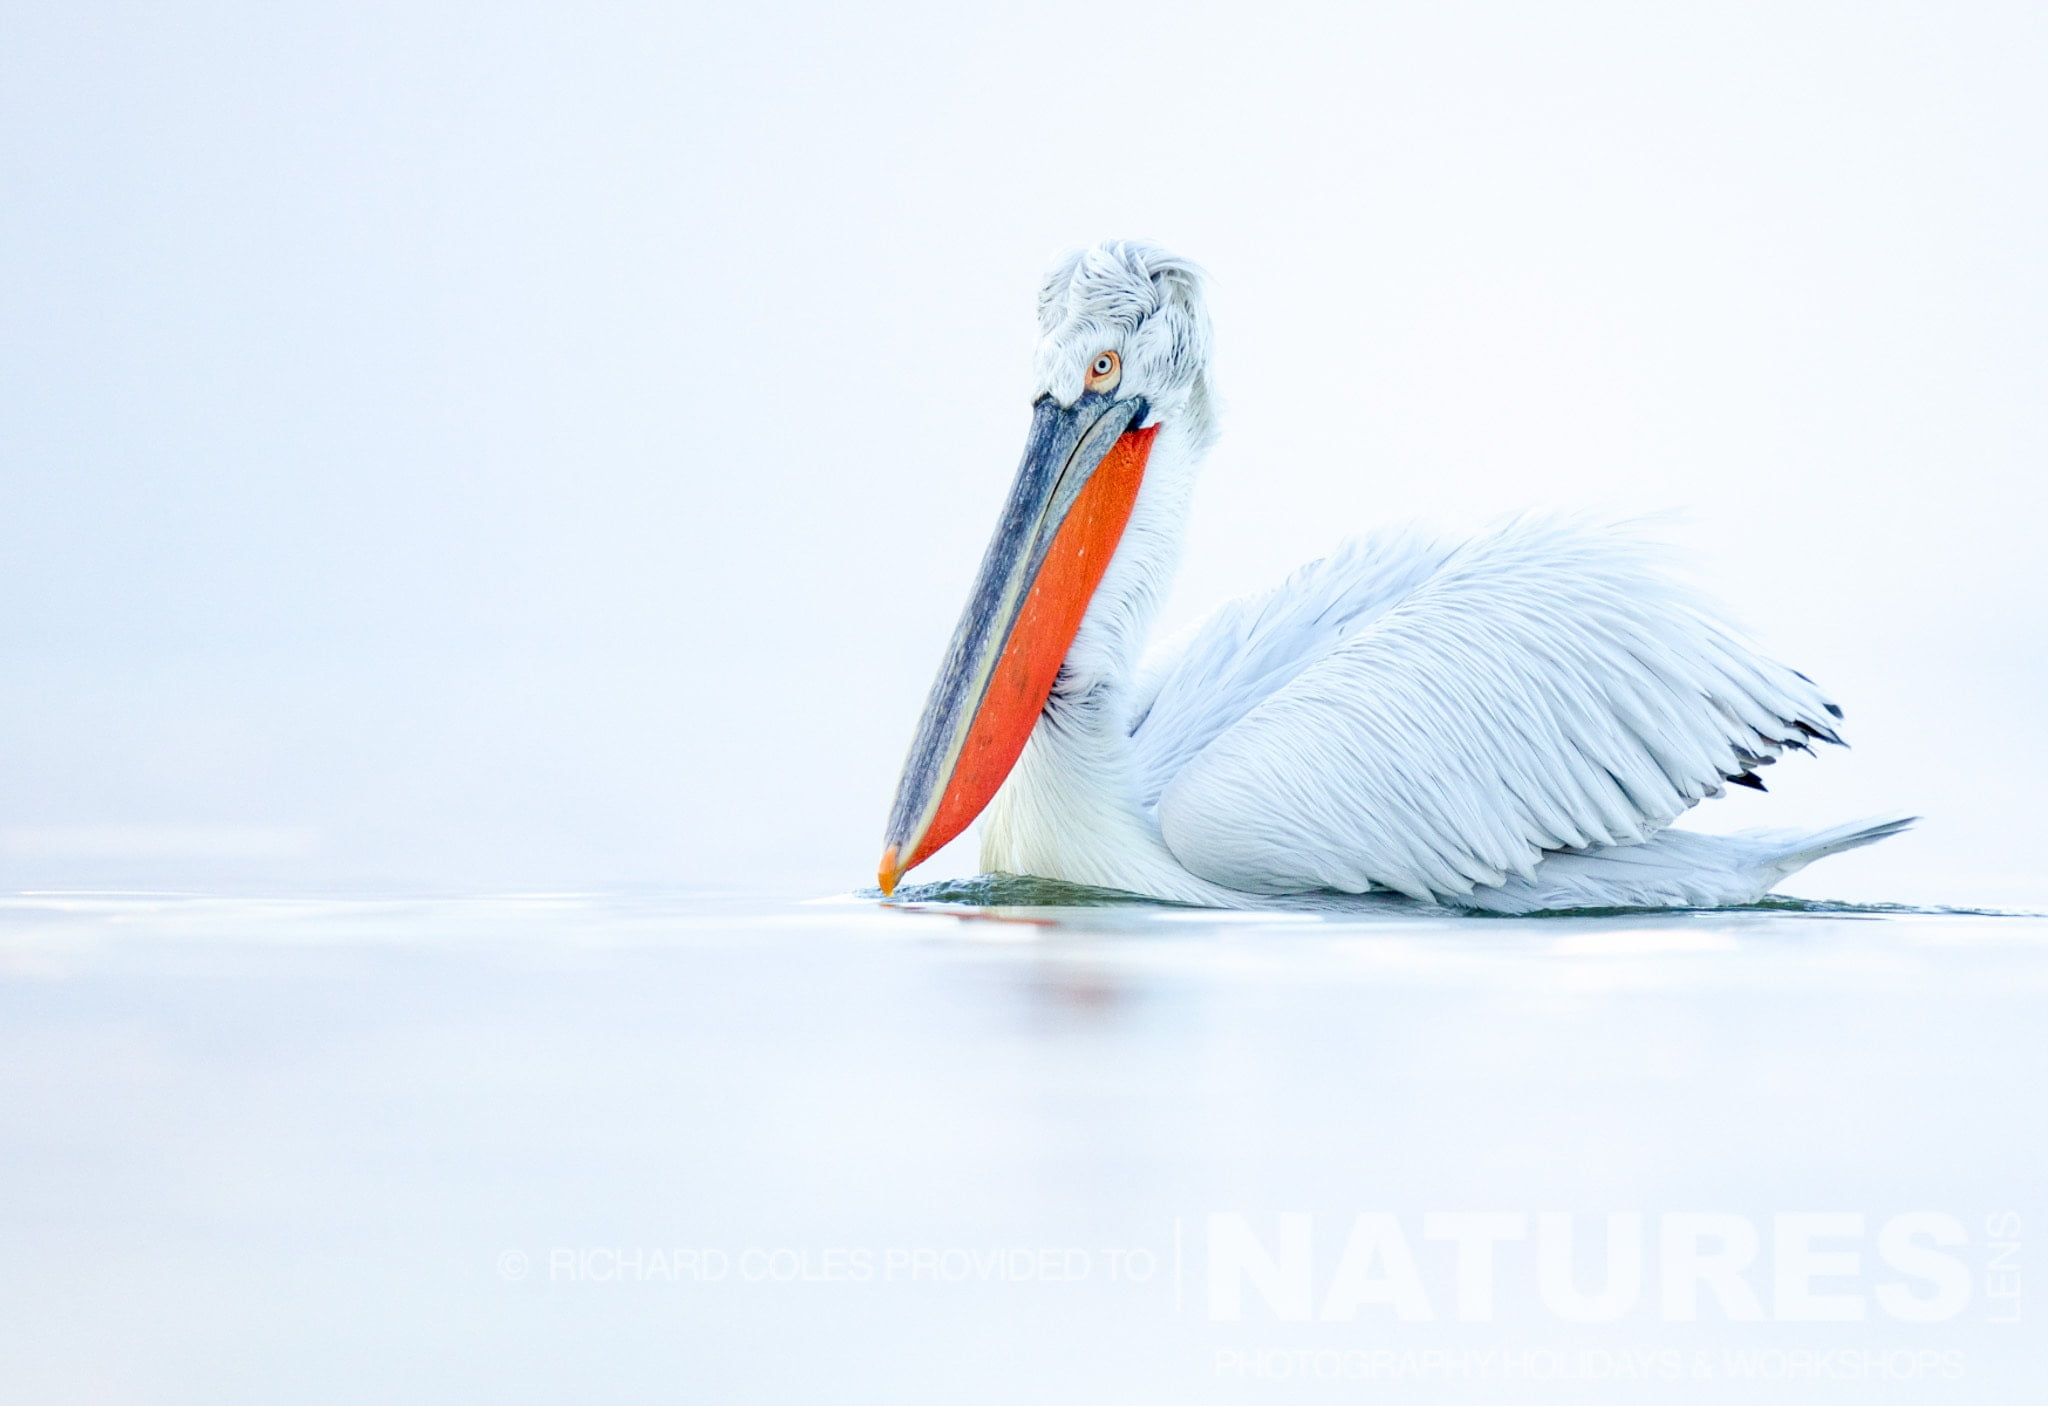 A solitary Dalmatian Pelican floats serenely on the milky lake photographed by Richard Coles during the 2016 NaturesLens Dalmatian Pelican Photography Holiday